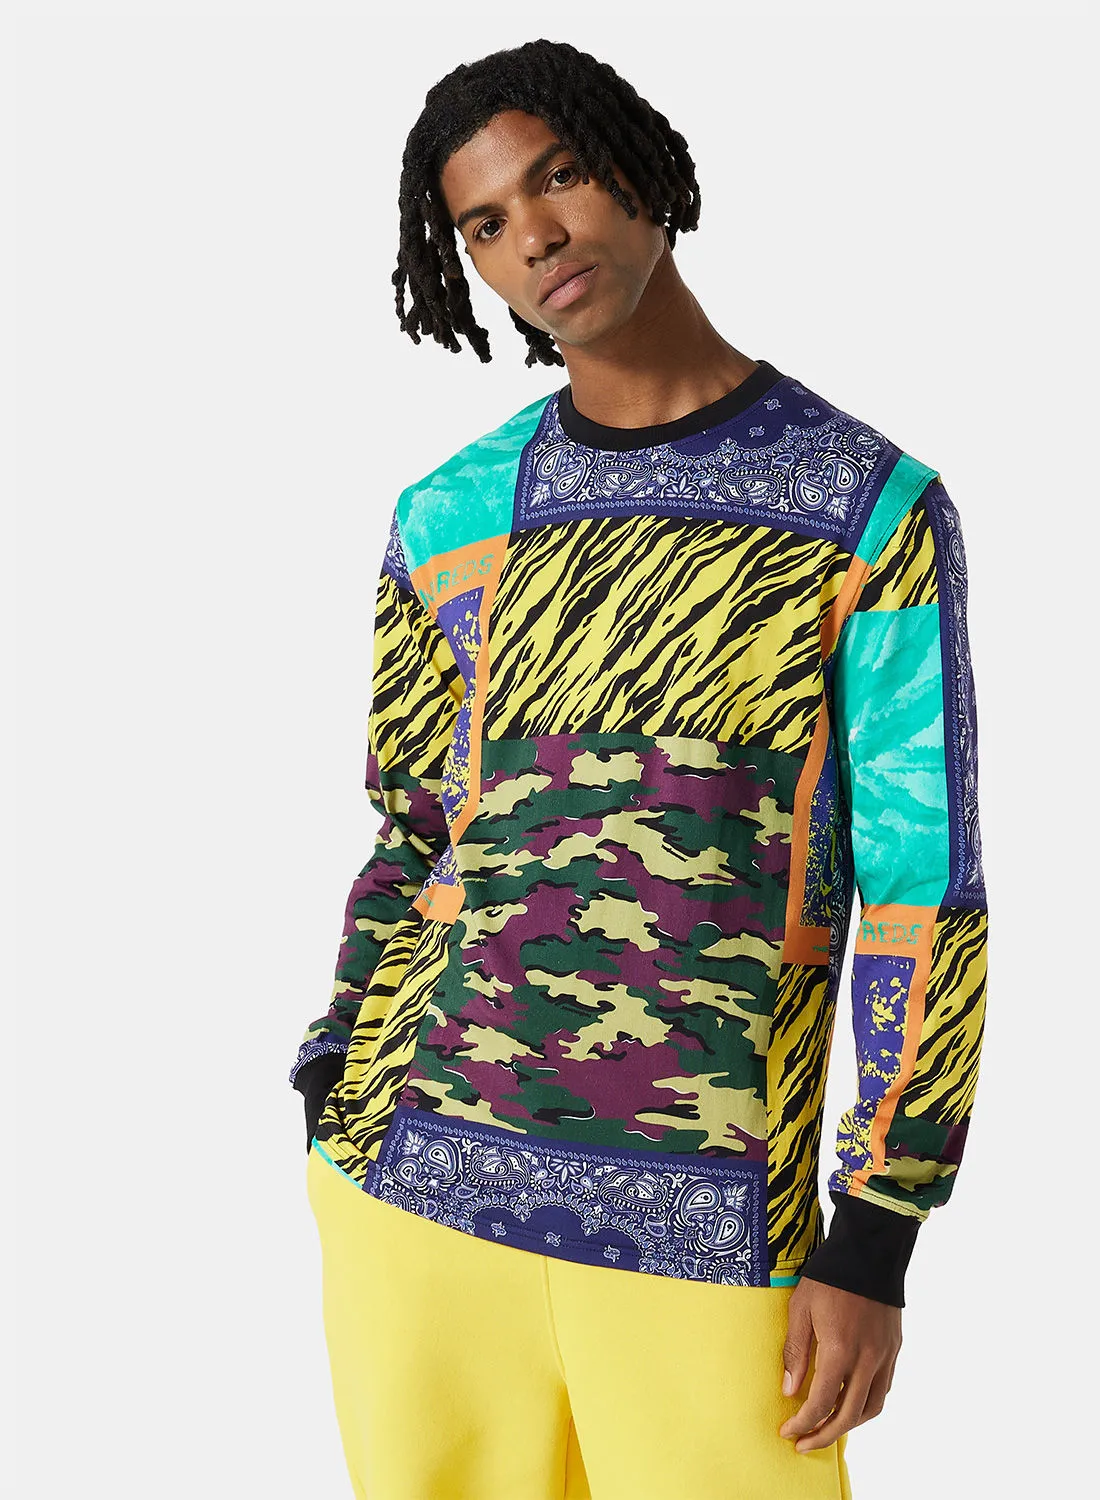 The Hundreds Collage Long Sleeve T-Shirt